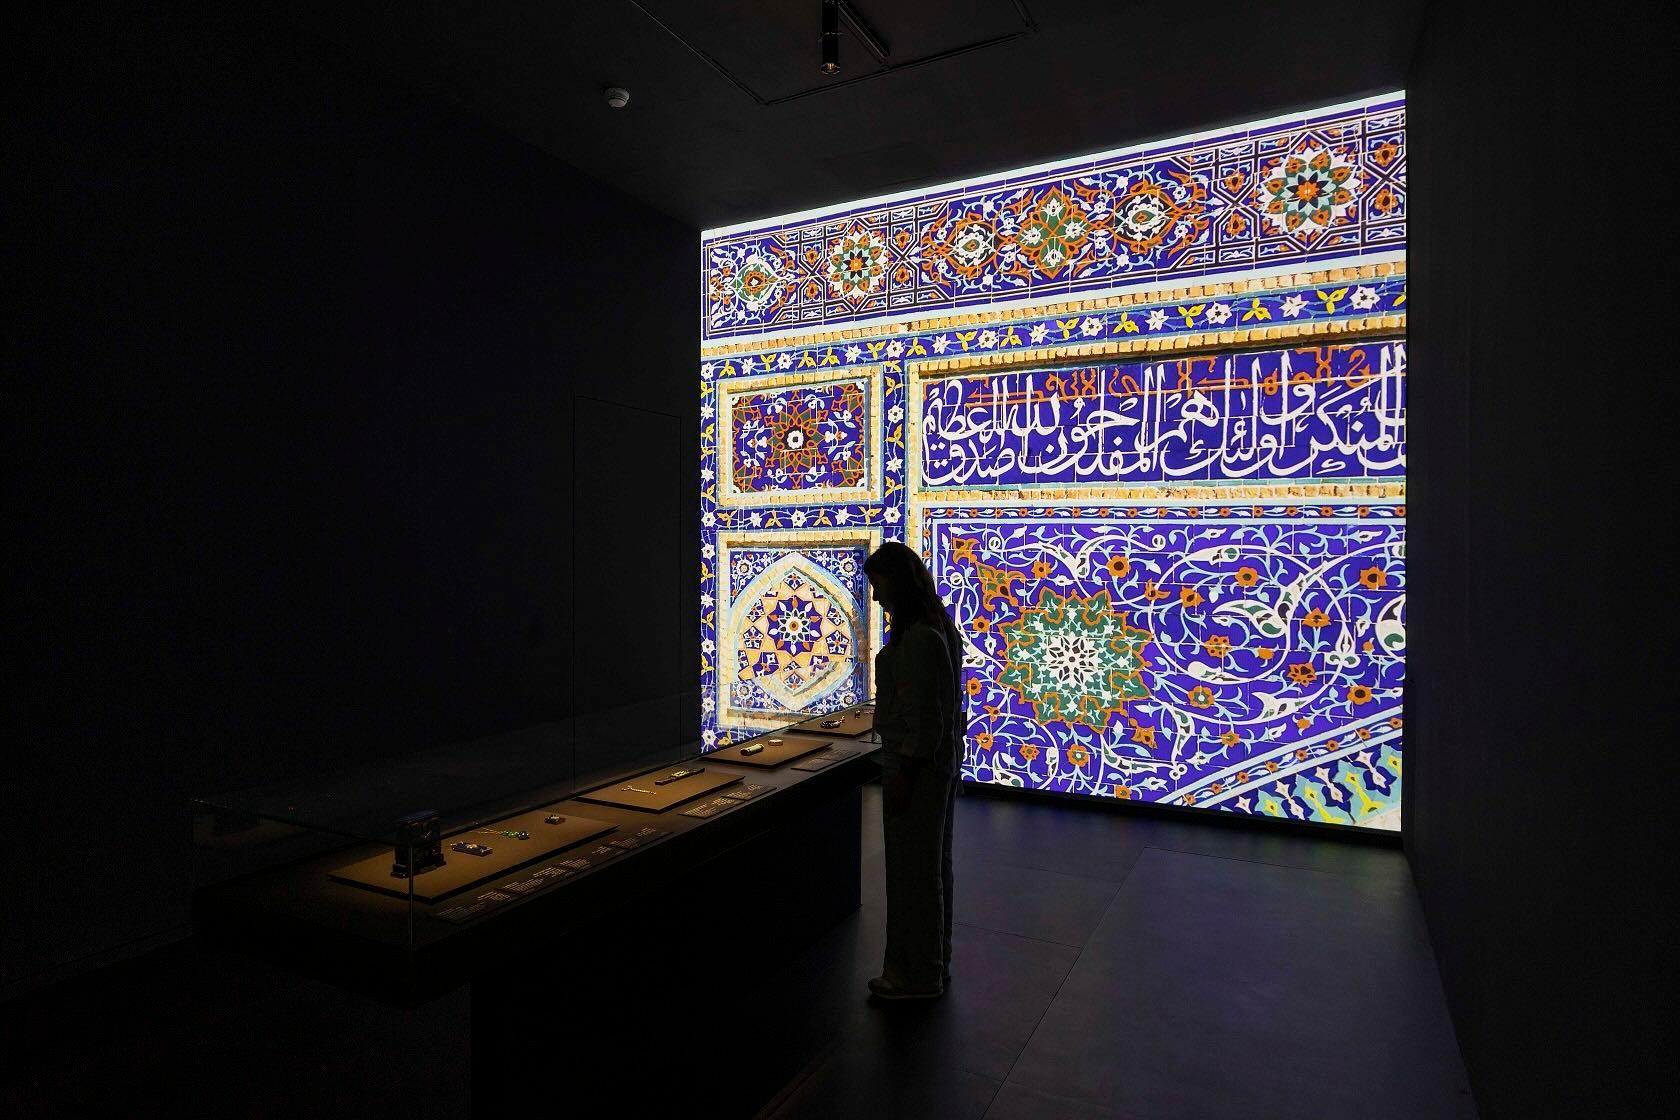 Discover the influence of Islamic art on Cartier at Louvre Abu Dhabi